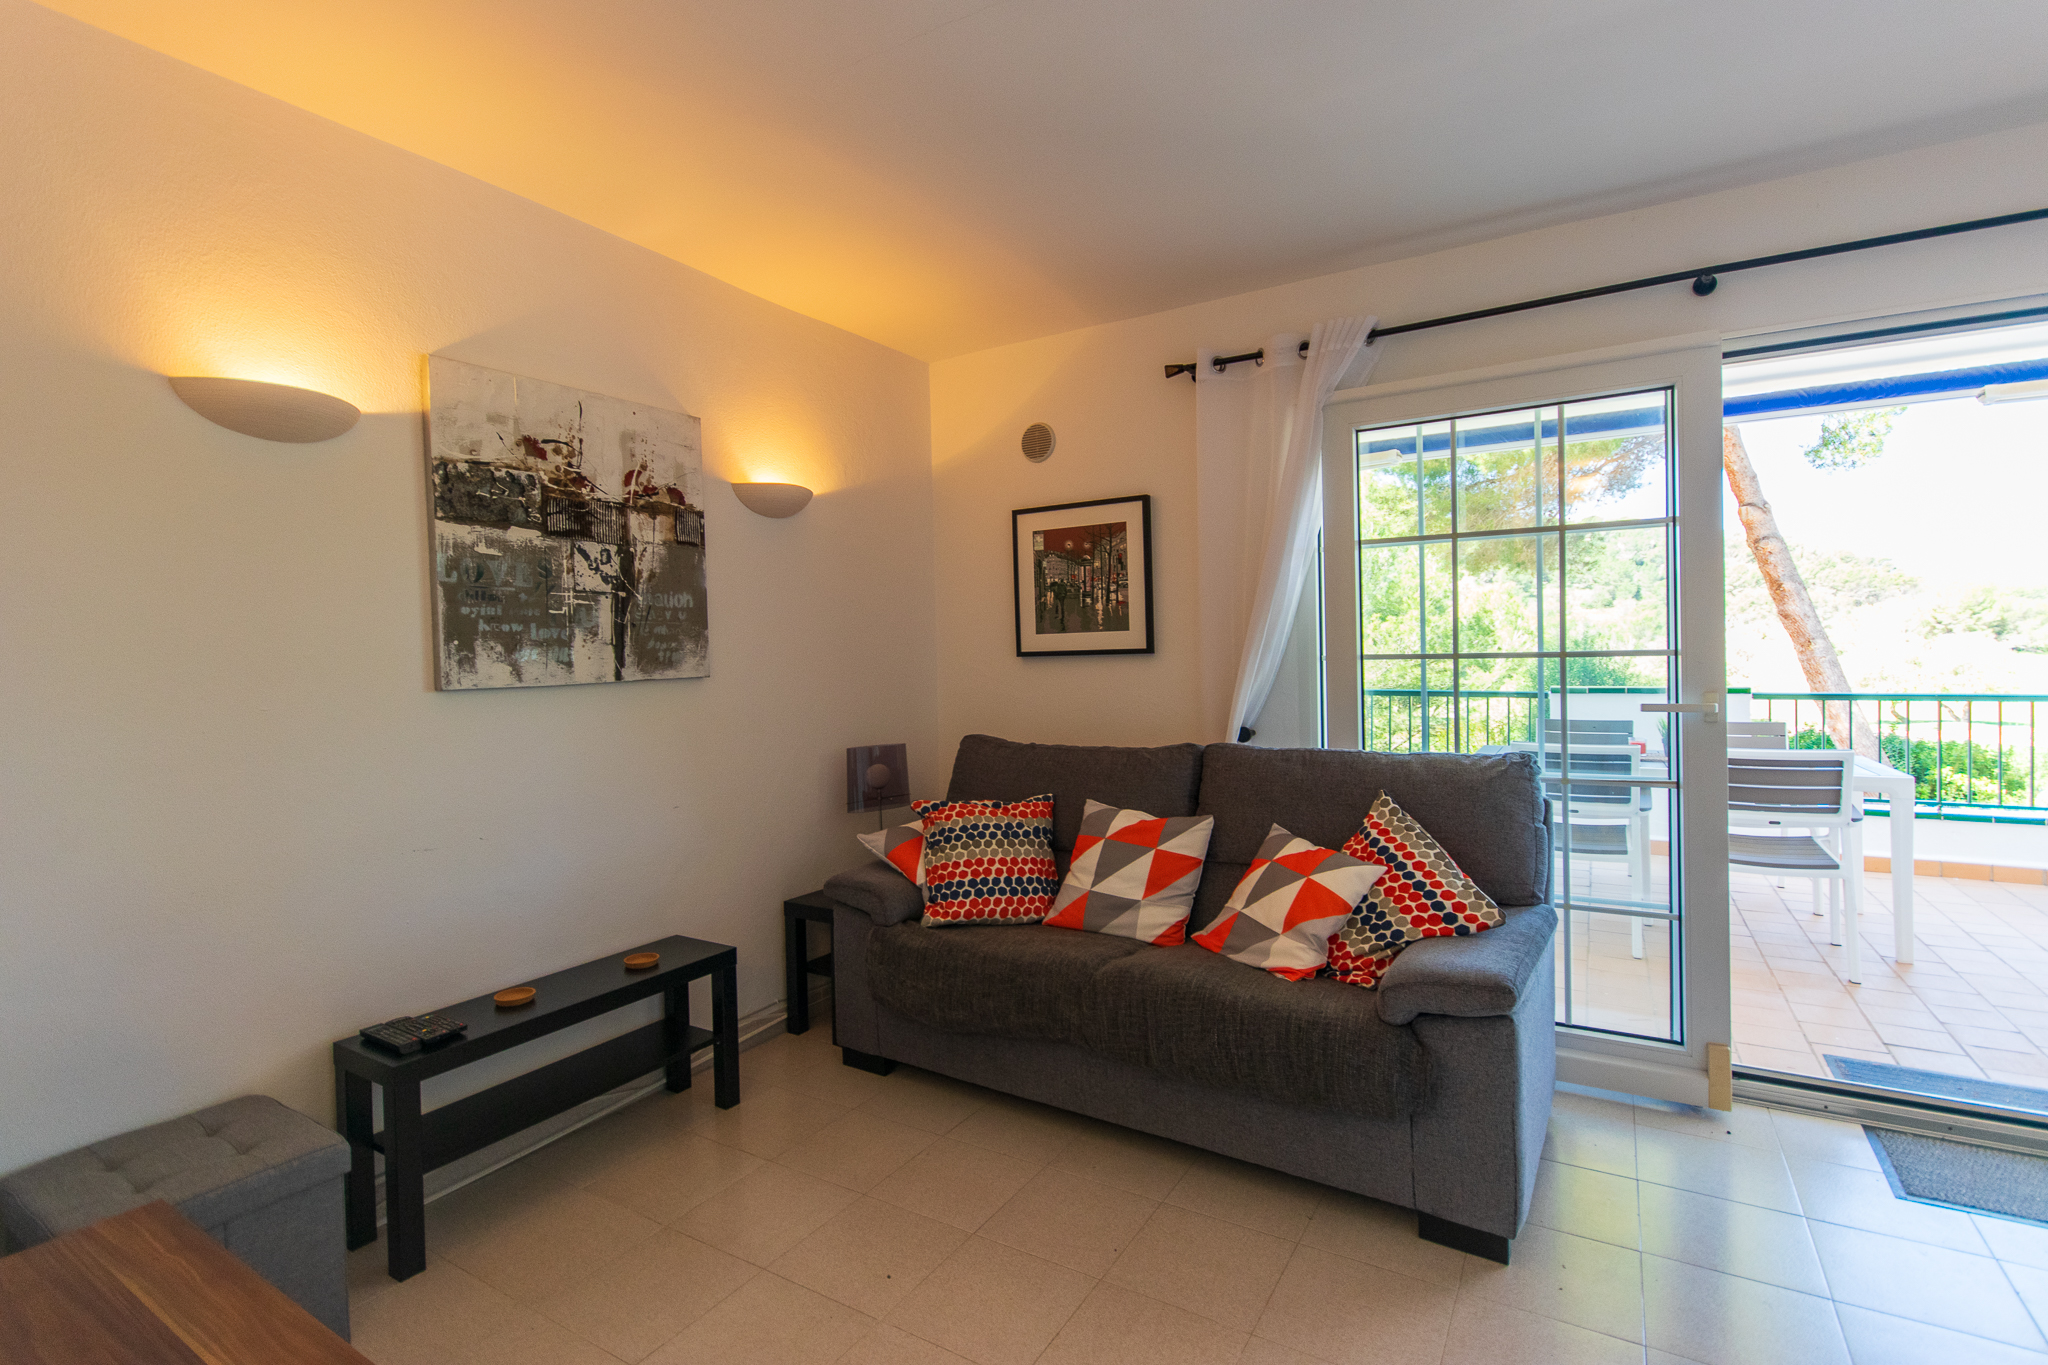 Living room apartment with terrace and pool for sale in Son Parc